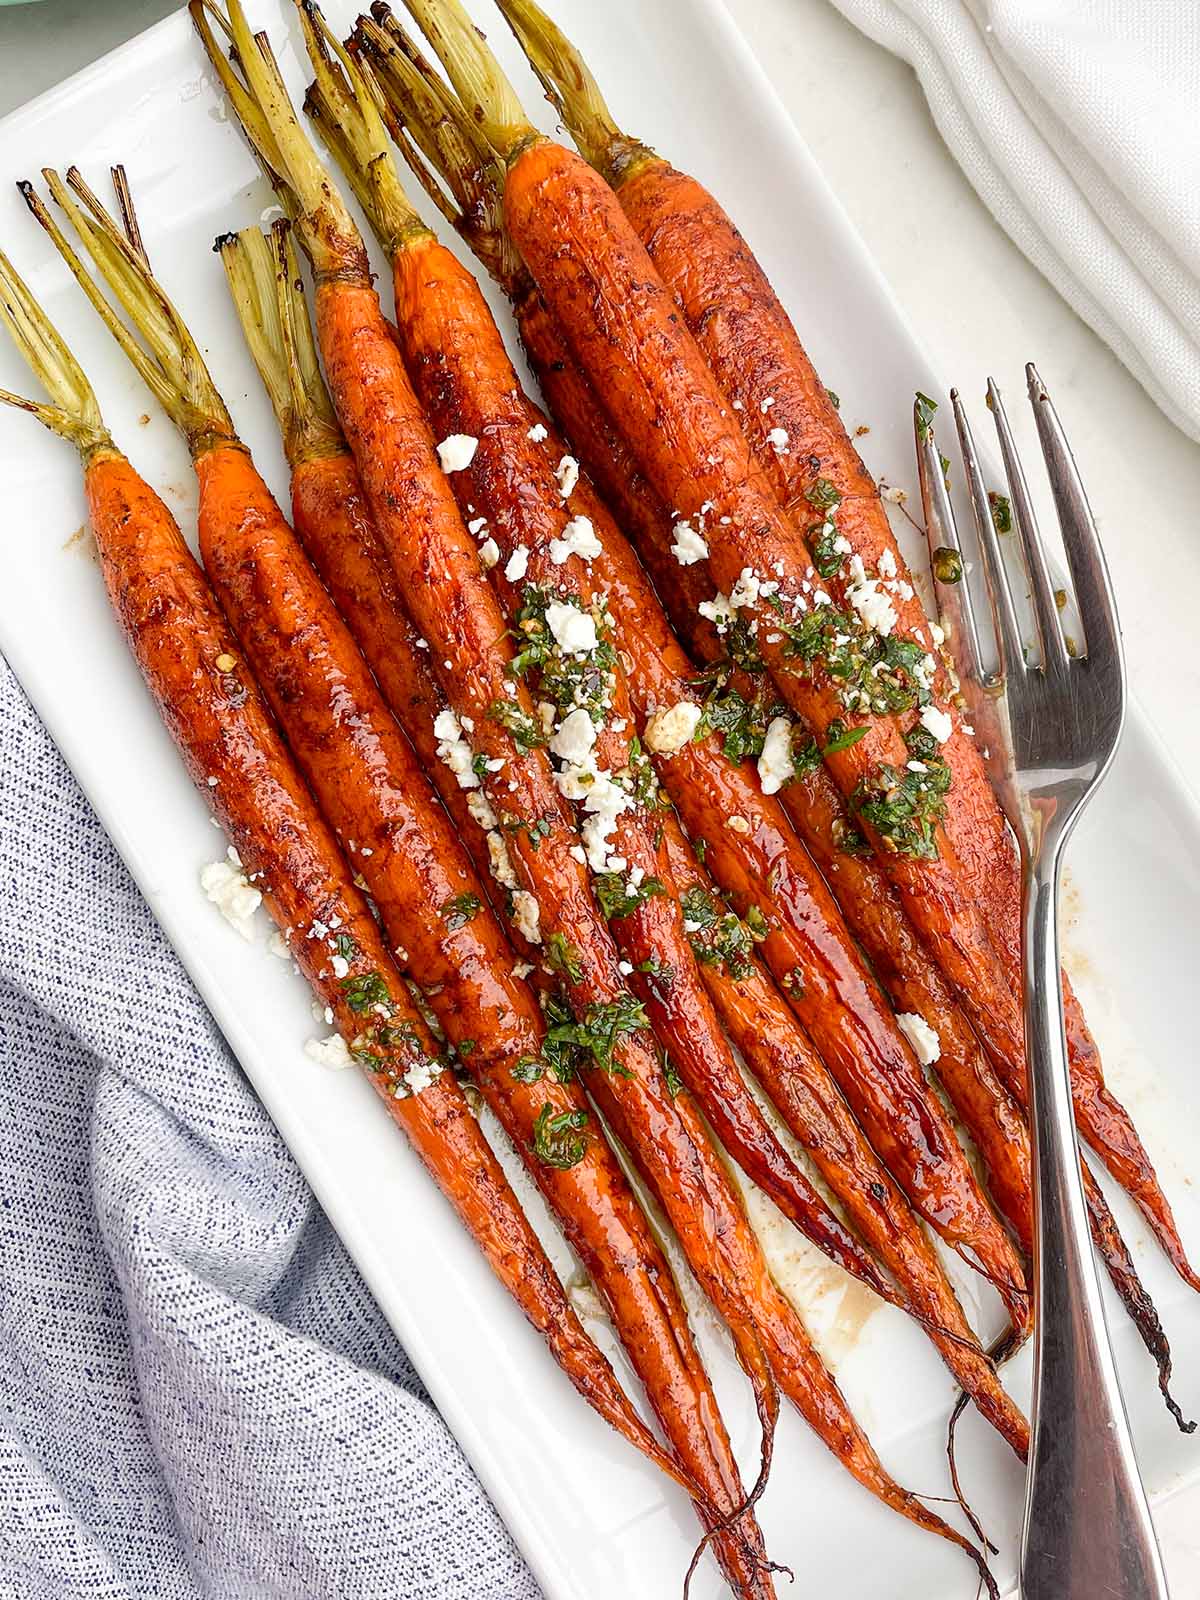 maple balsamic glazed carrots topped with feta and chimichurri on a white platter.